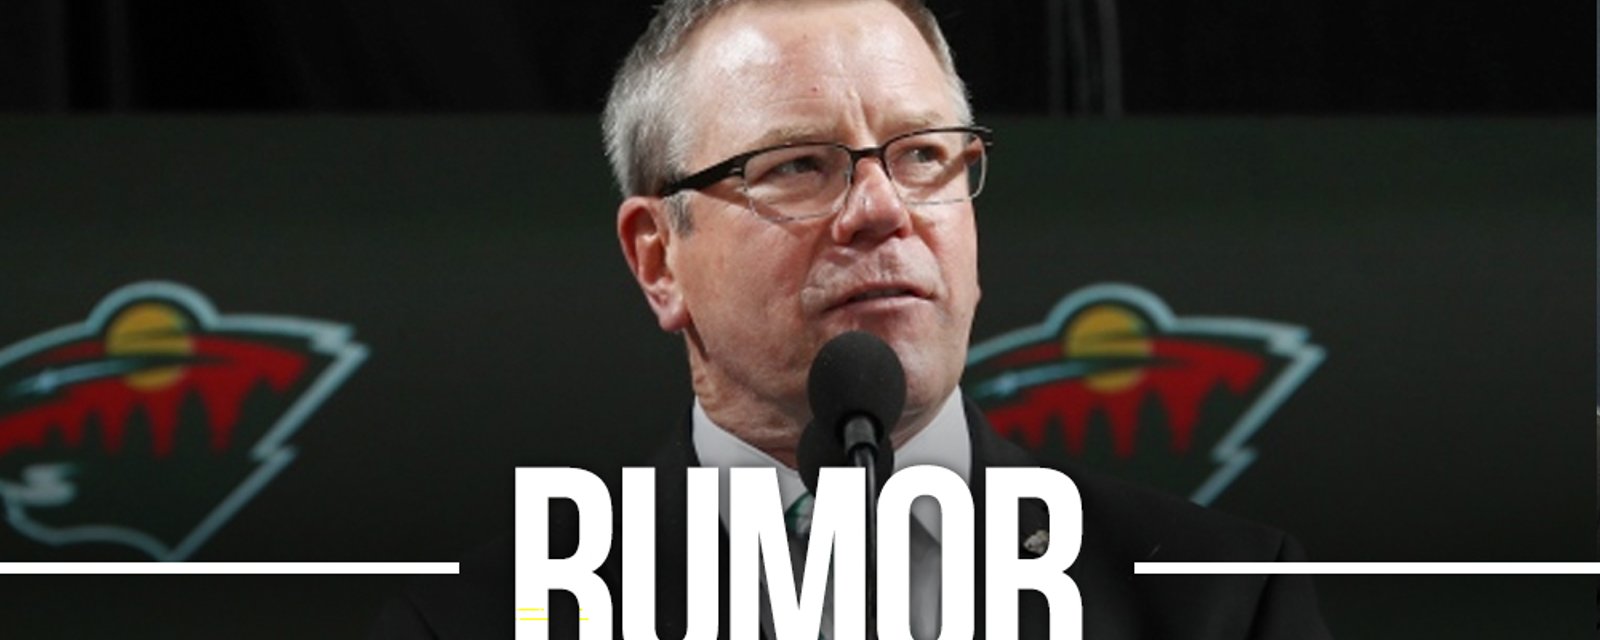 Failed former Wild GM Paul Fenton is reportedly back in NHL